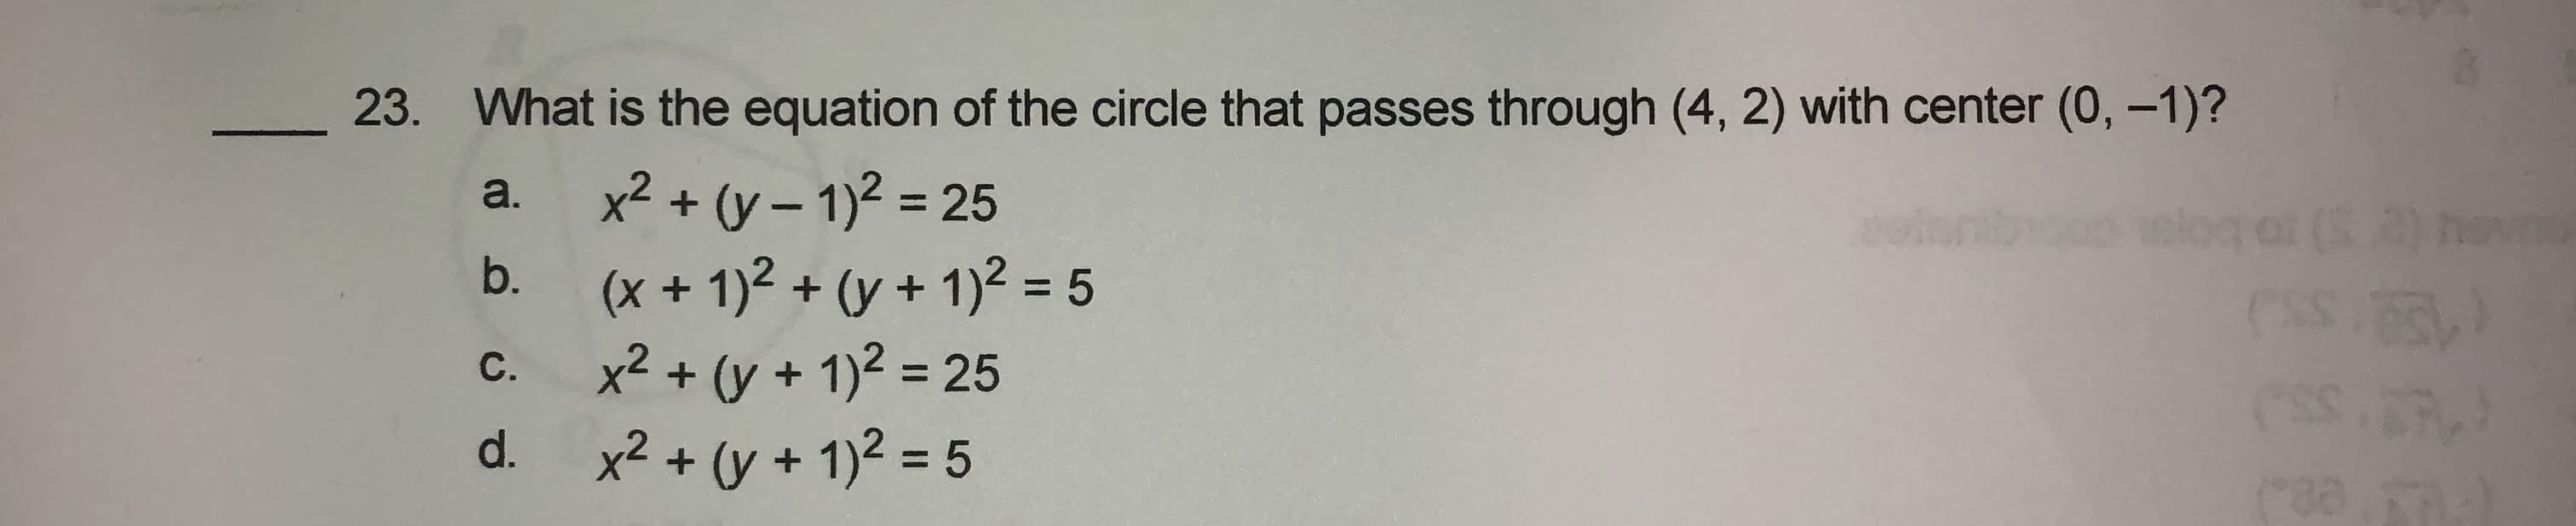 _23. What is the equation of the circle that passes through (4, 2) with center (0, -1)?
x2 + (y – 1)2 = 25
(x + 1)2 + (y + 1)² = 5
x² + (y + 1)² = 25
x² + (y + 1)² = 5
a.
(S
b.
C.
d.
%3D
